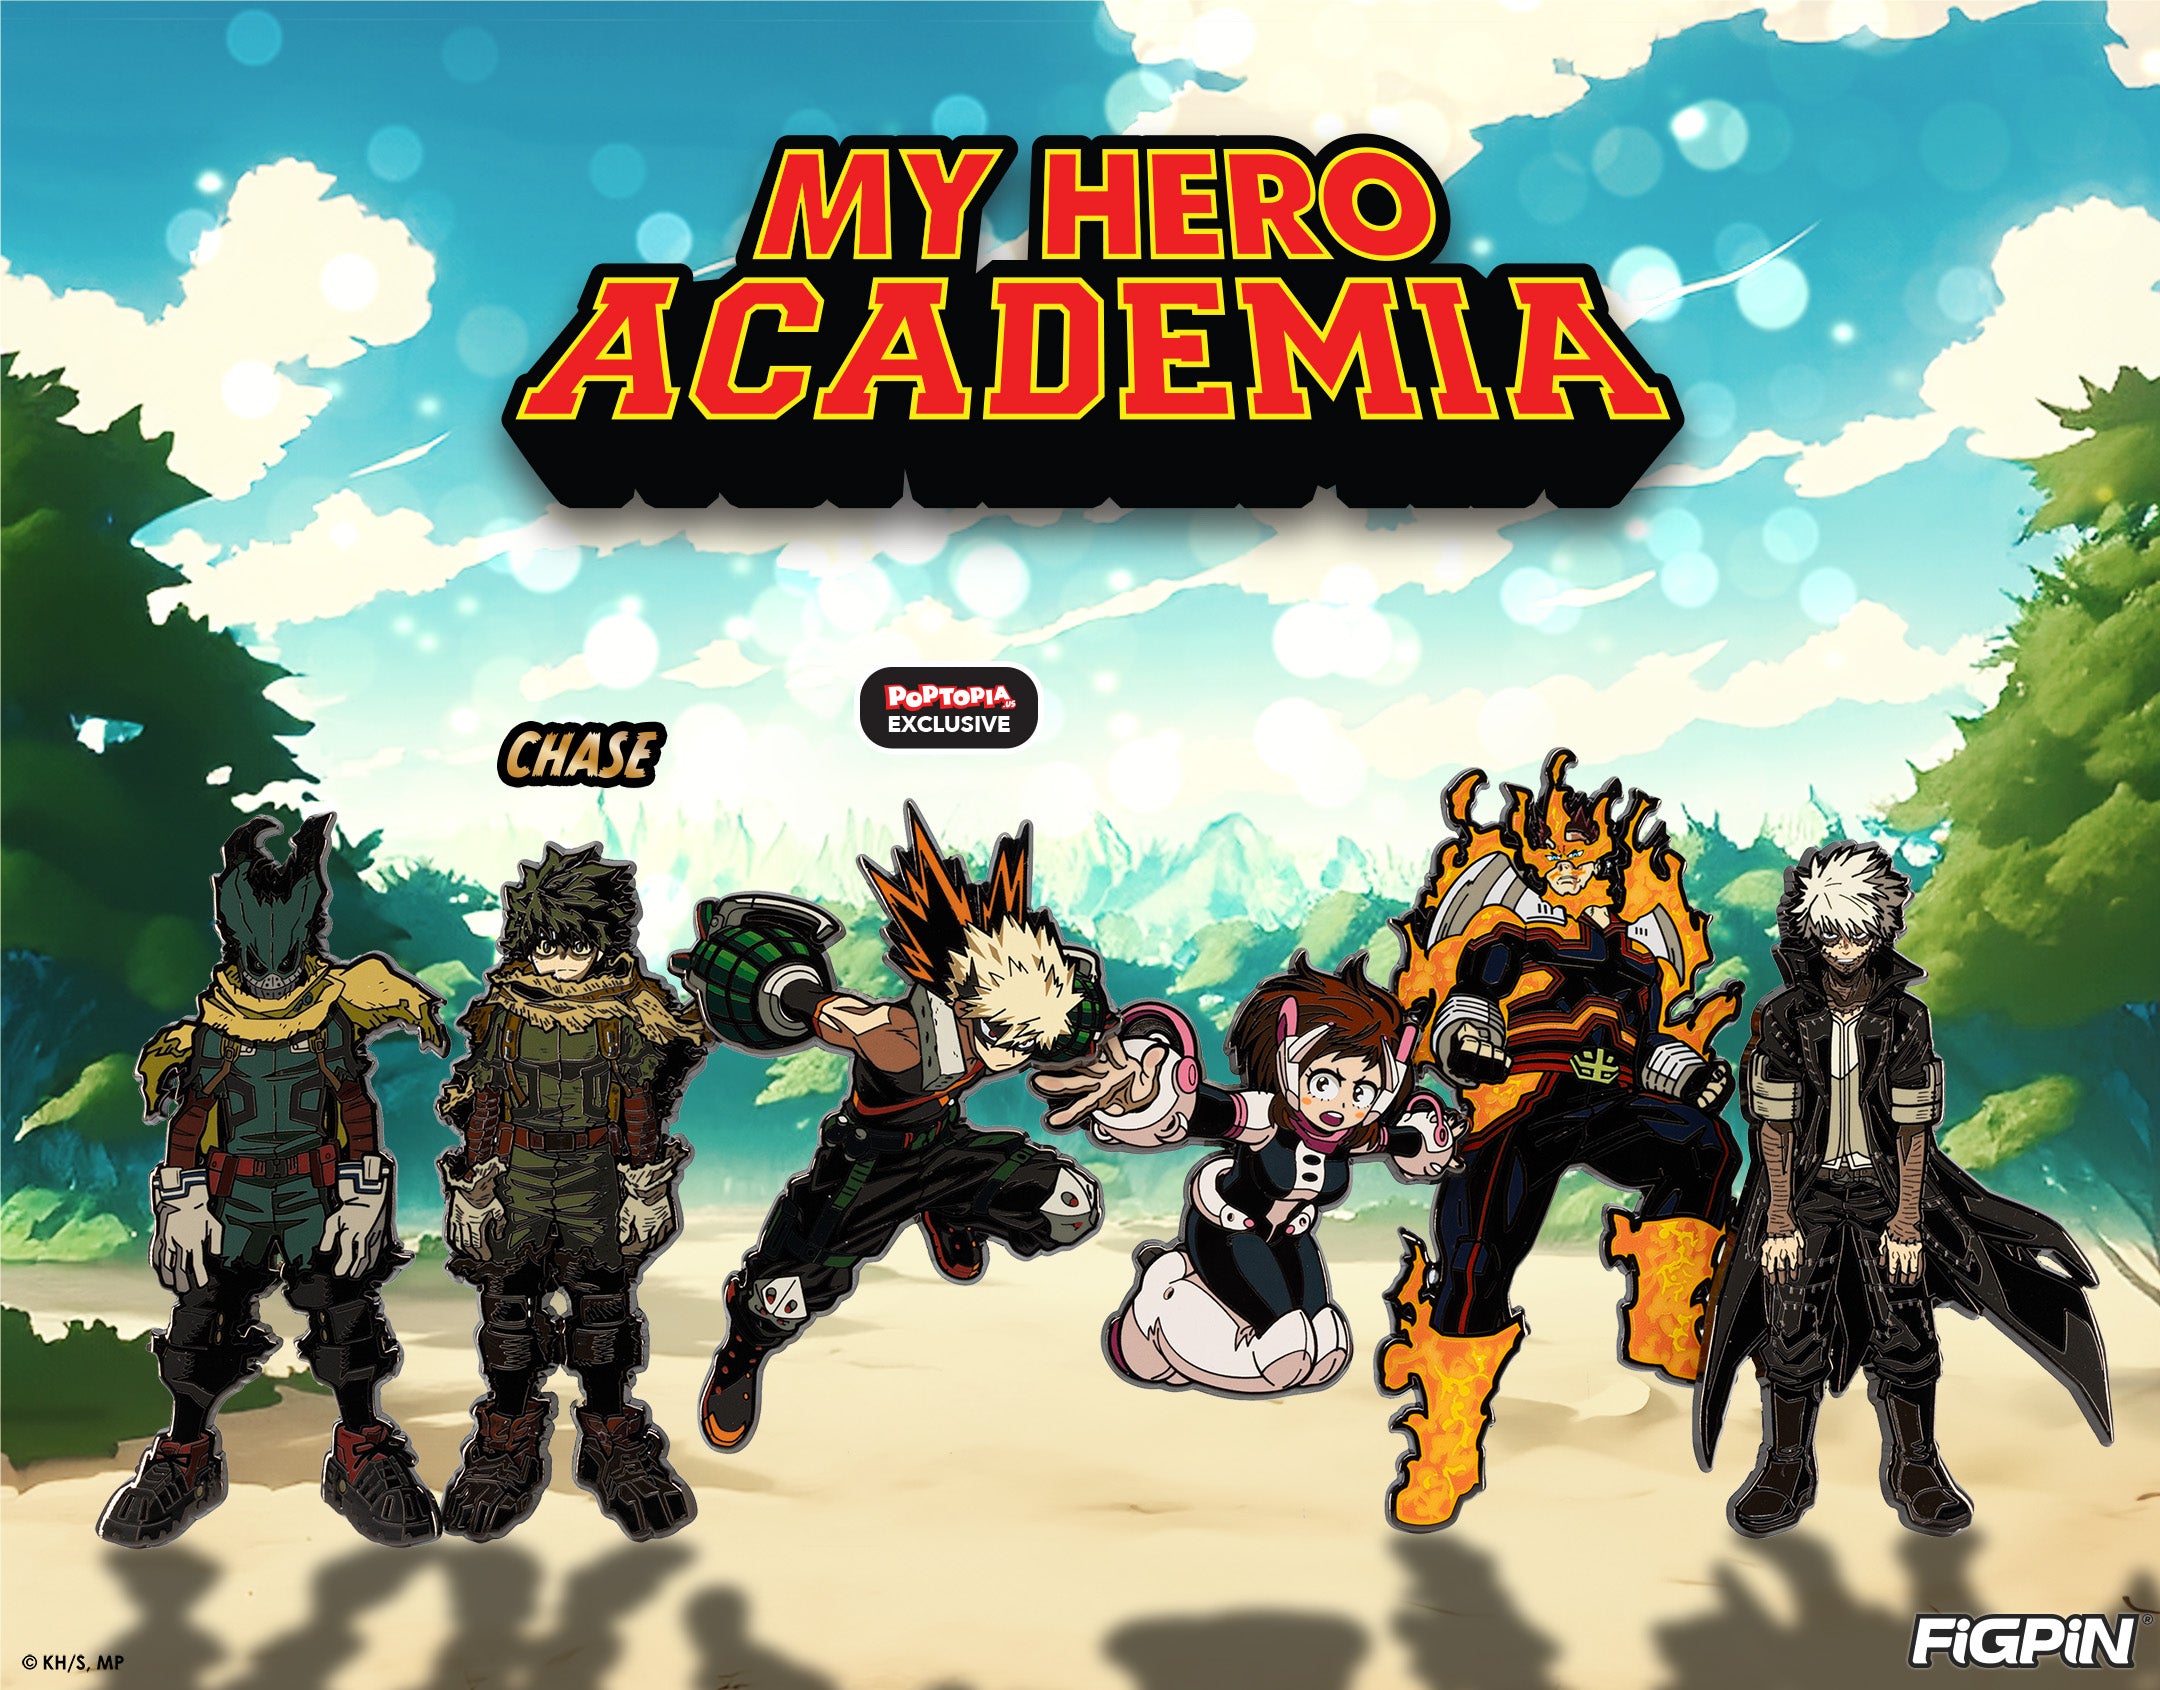 Photograph of My Hero Academia characters available as enamel pins in this My Hero Academia FiGPiN wave release